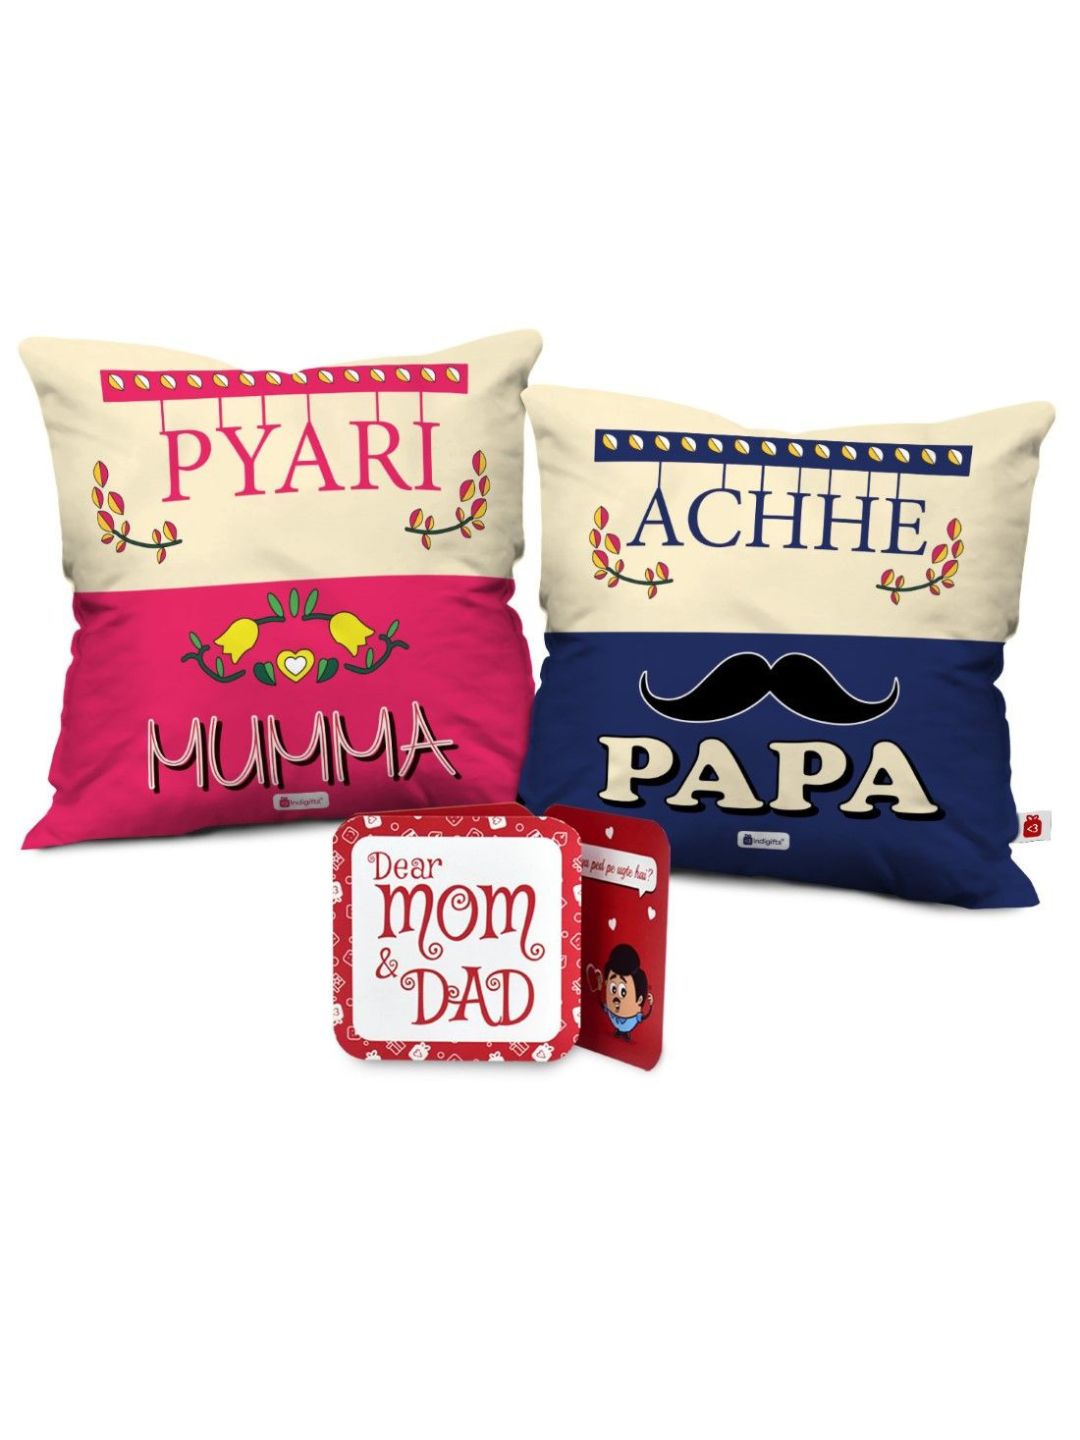 Indigifts Pyari Mummy Ache Papa Printed 12×12 inches Cushions with Filler| Set of 2| Multicolour| Polycotton|Home Decor| Mom Dad Gift | Gift for Parents | Mummy Birthday Gifts | Mothers Days Gifts